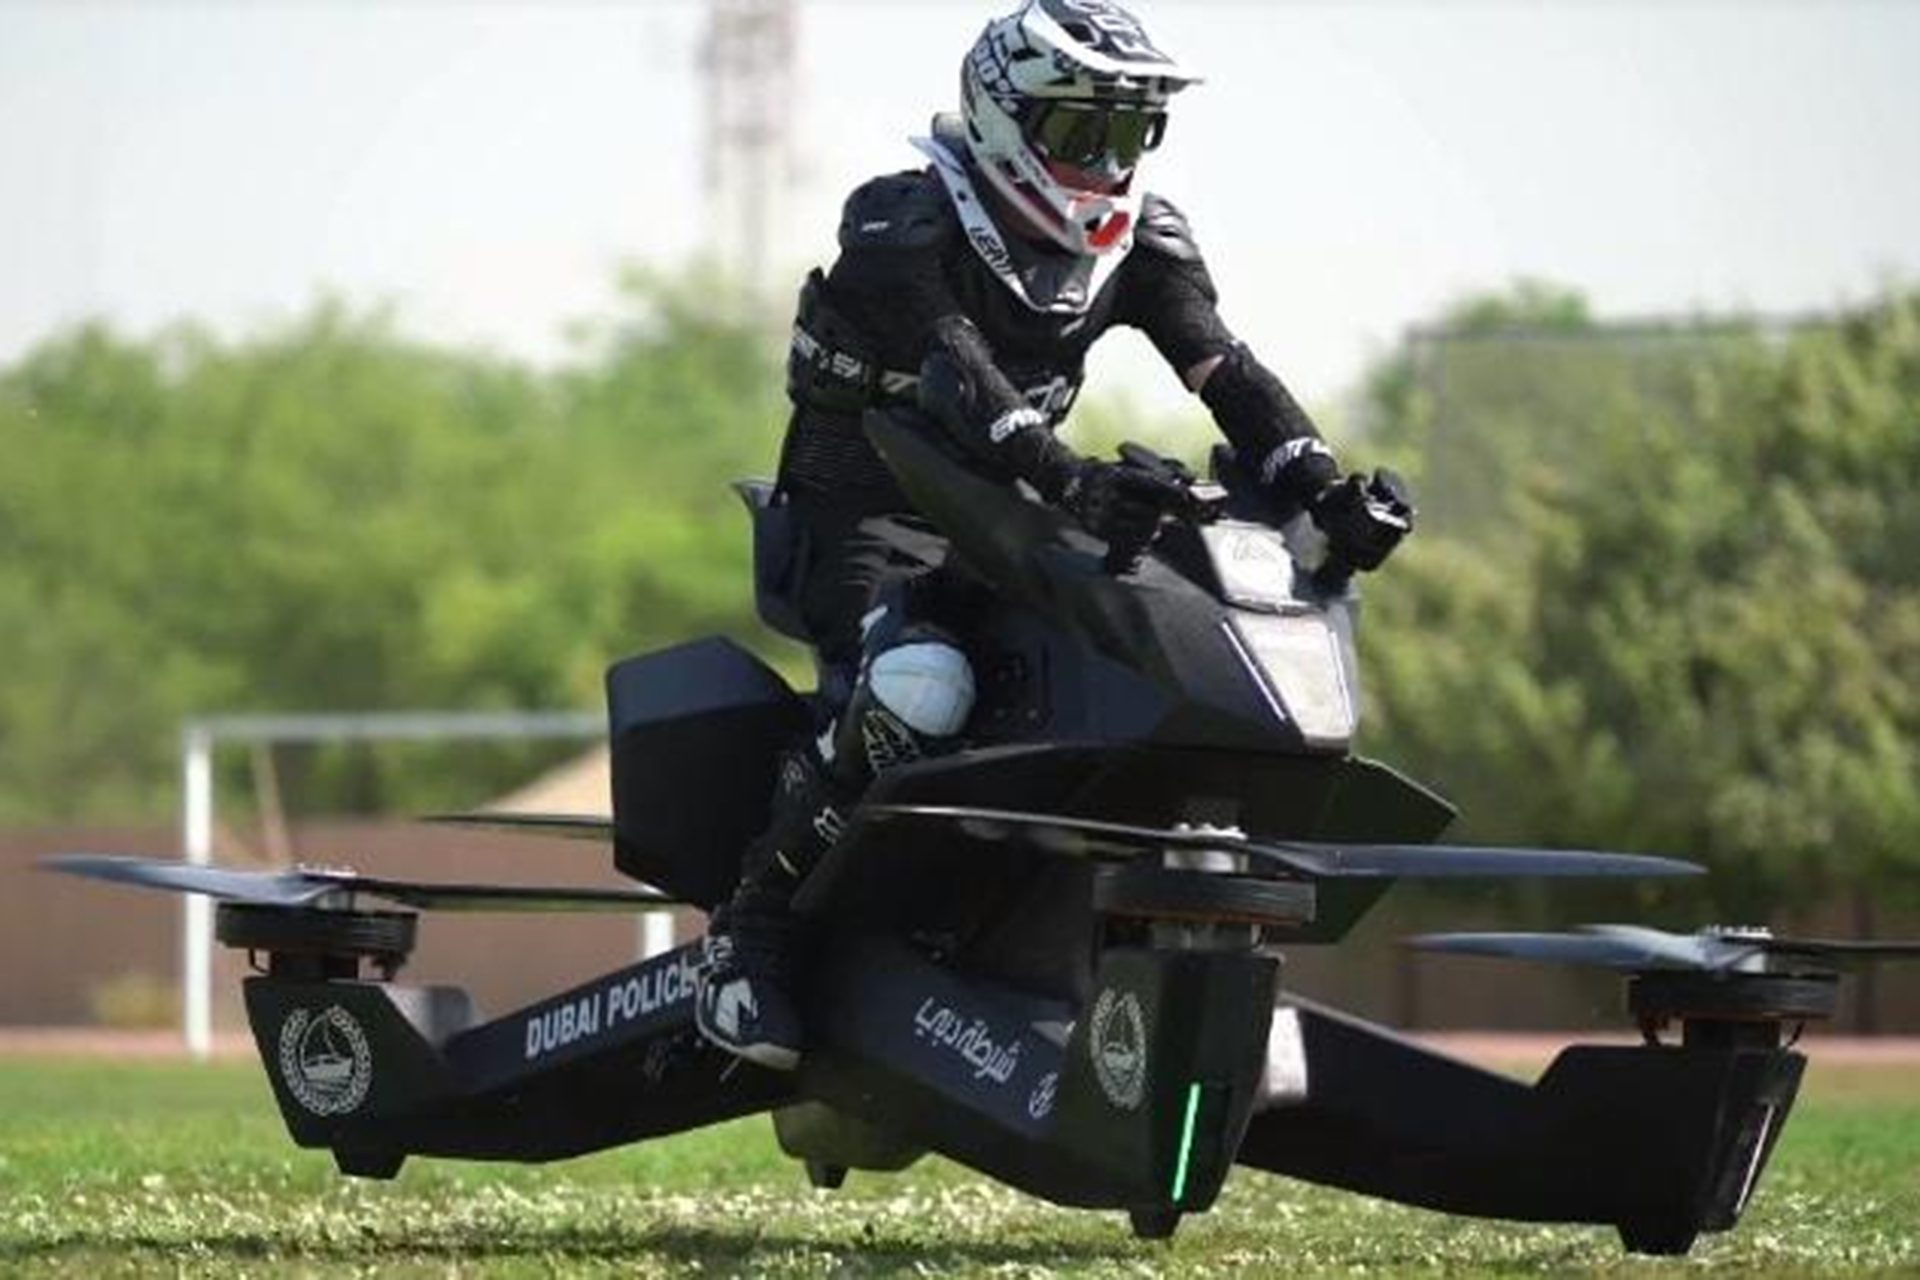 This is Dubai's new crimefighting hoverbike Time Out Dubai